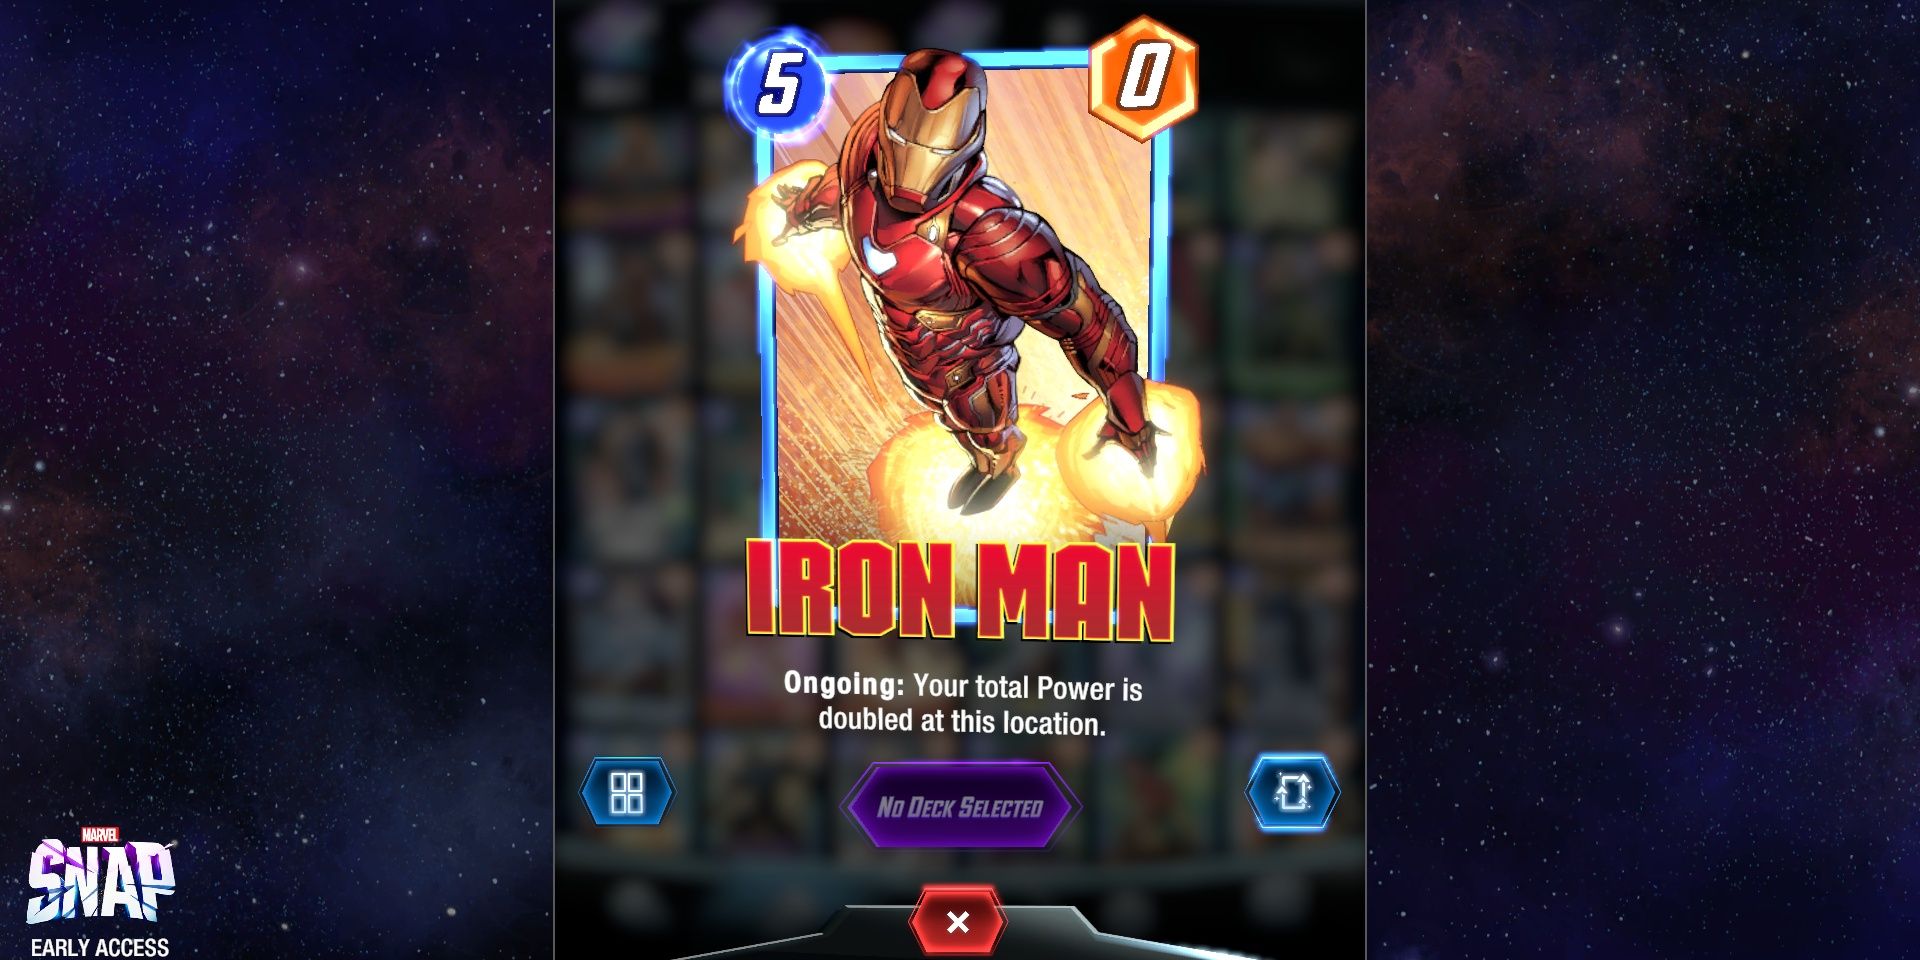 The Iron Man card in Marvel Snap on top of promotional art in a split image